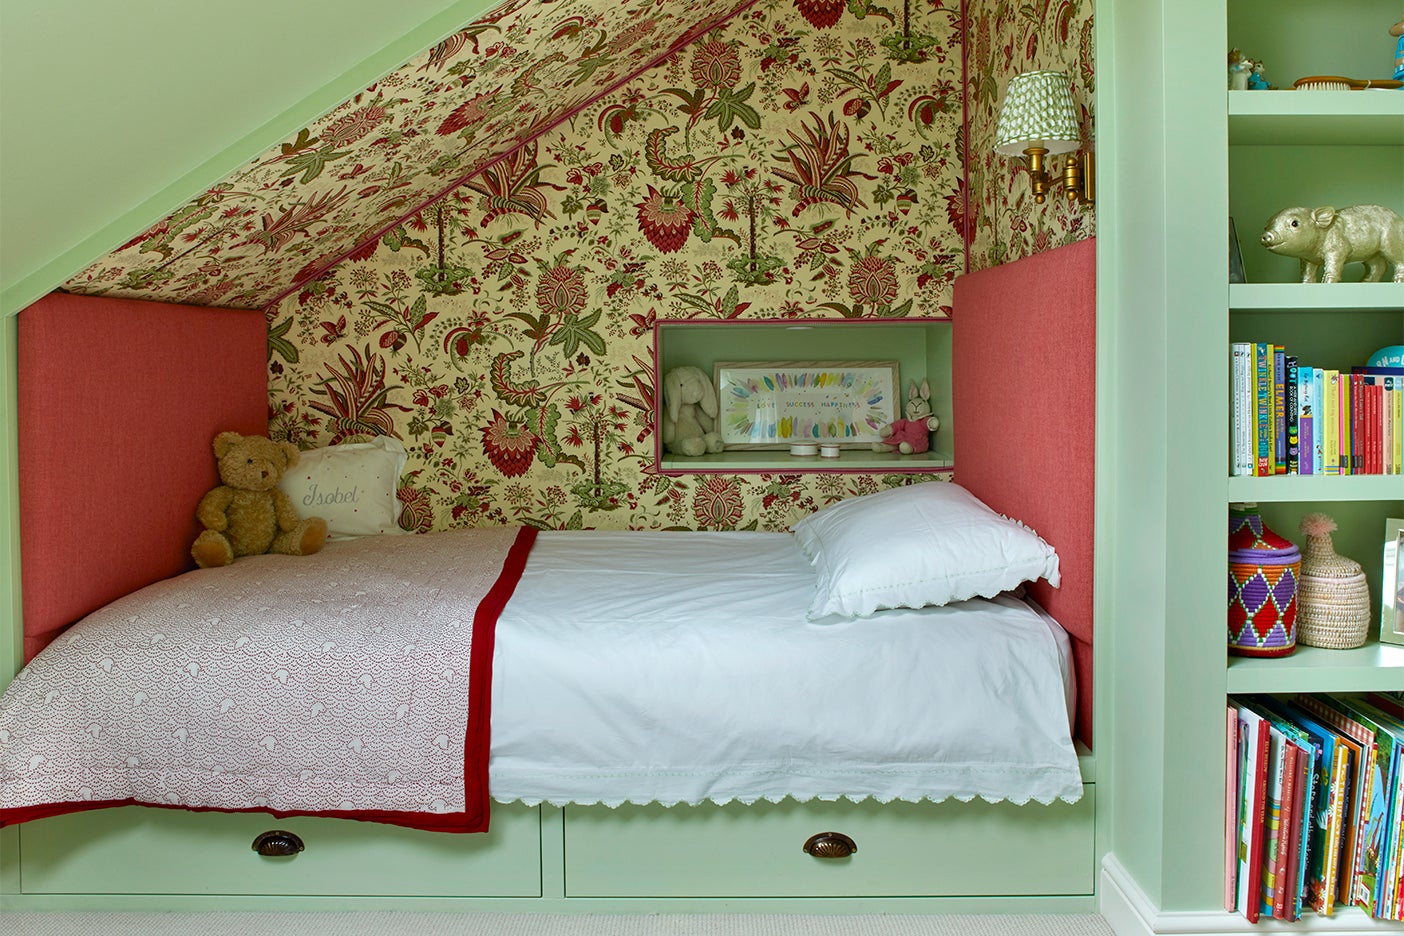 Kids built-in bed nook with floral fabric walls